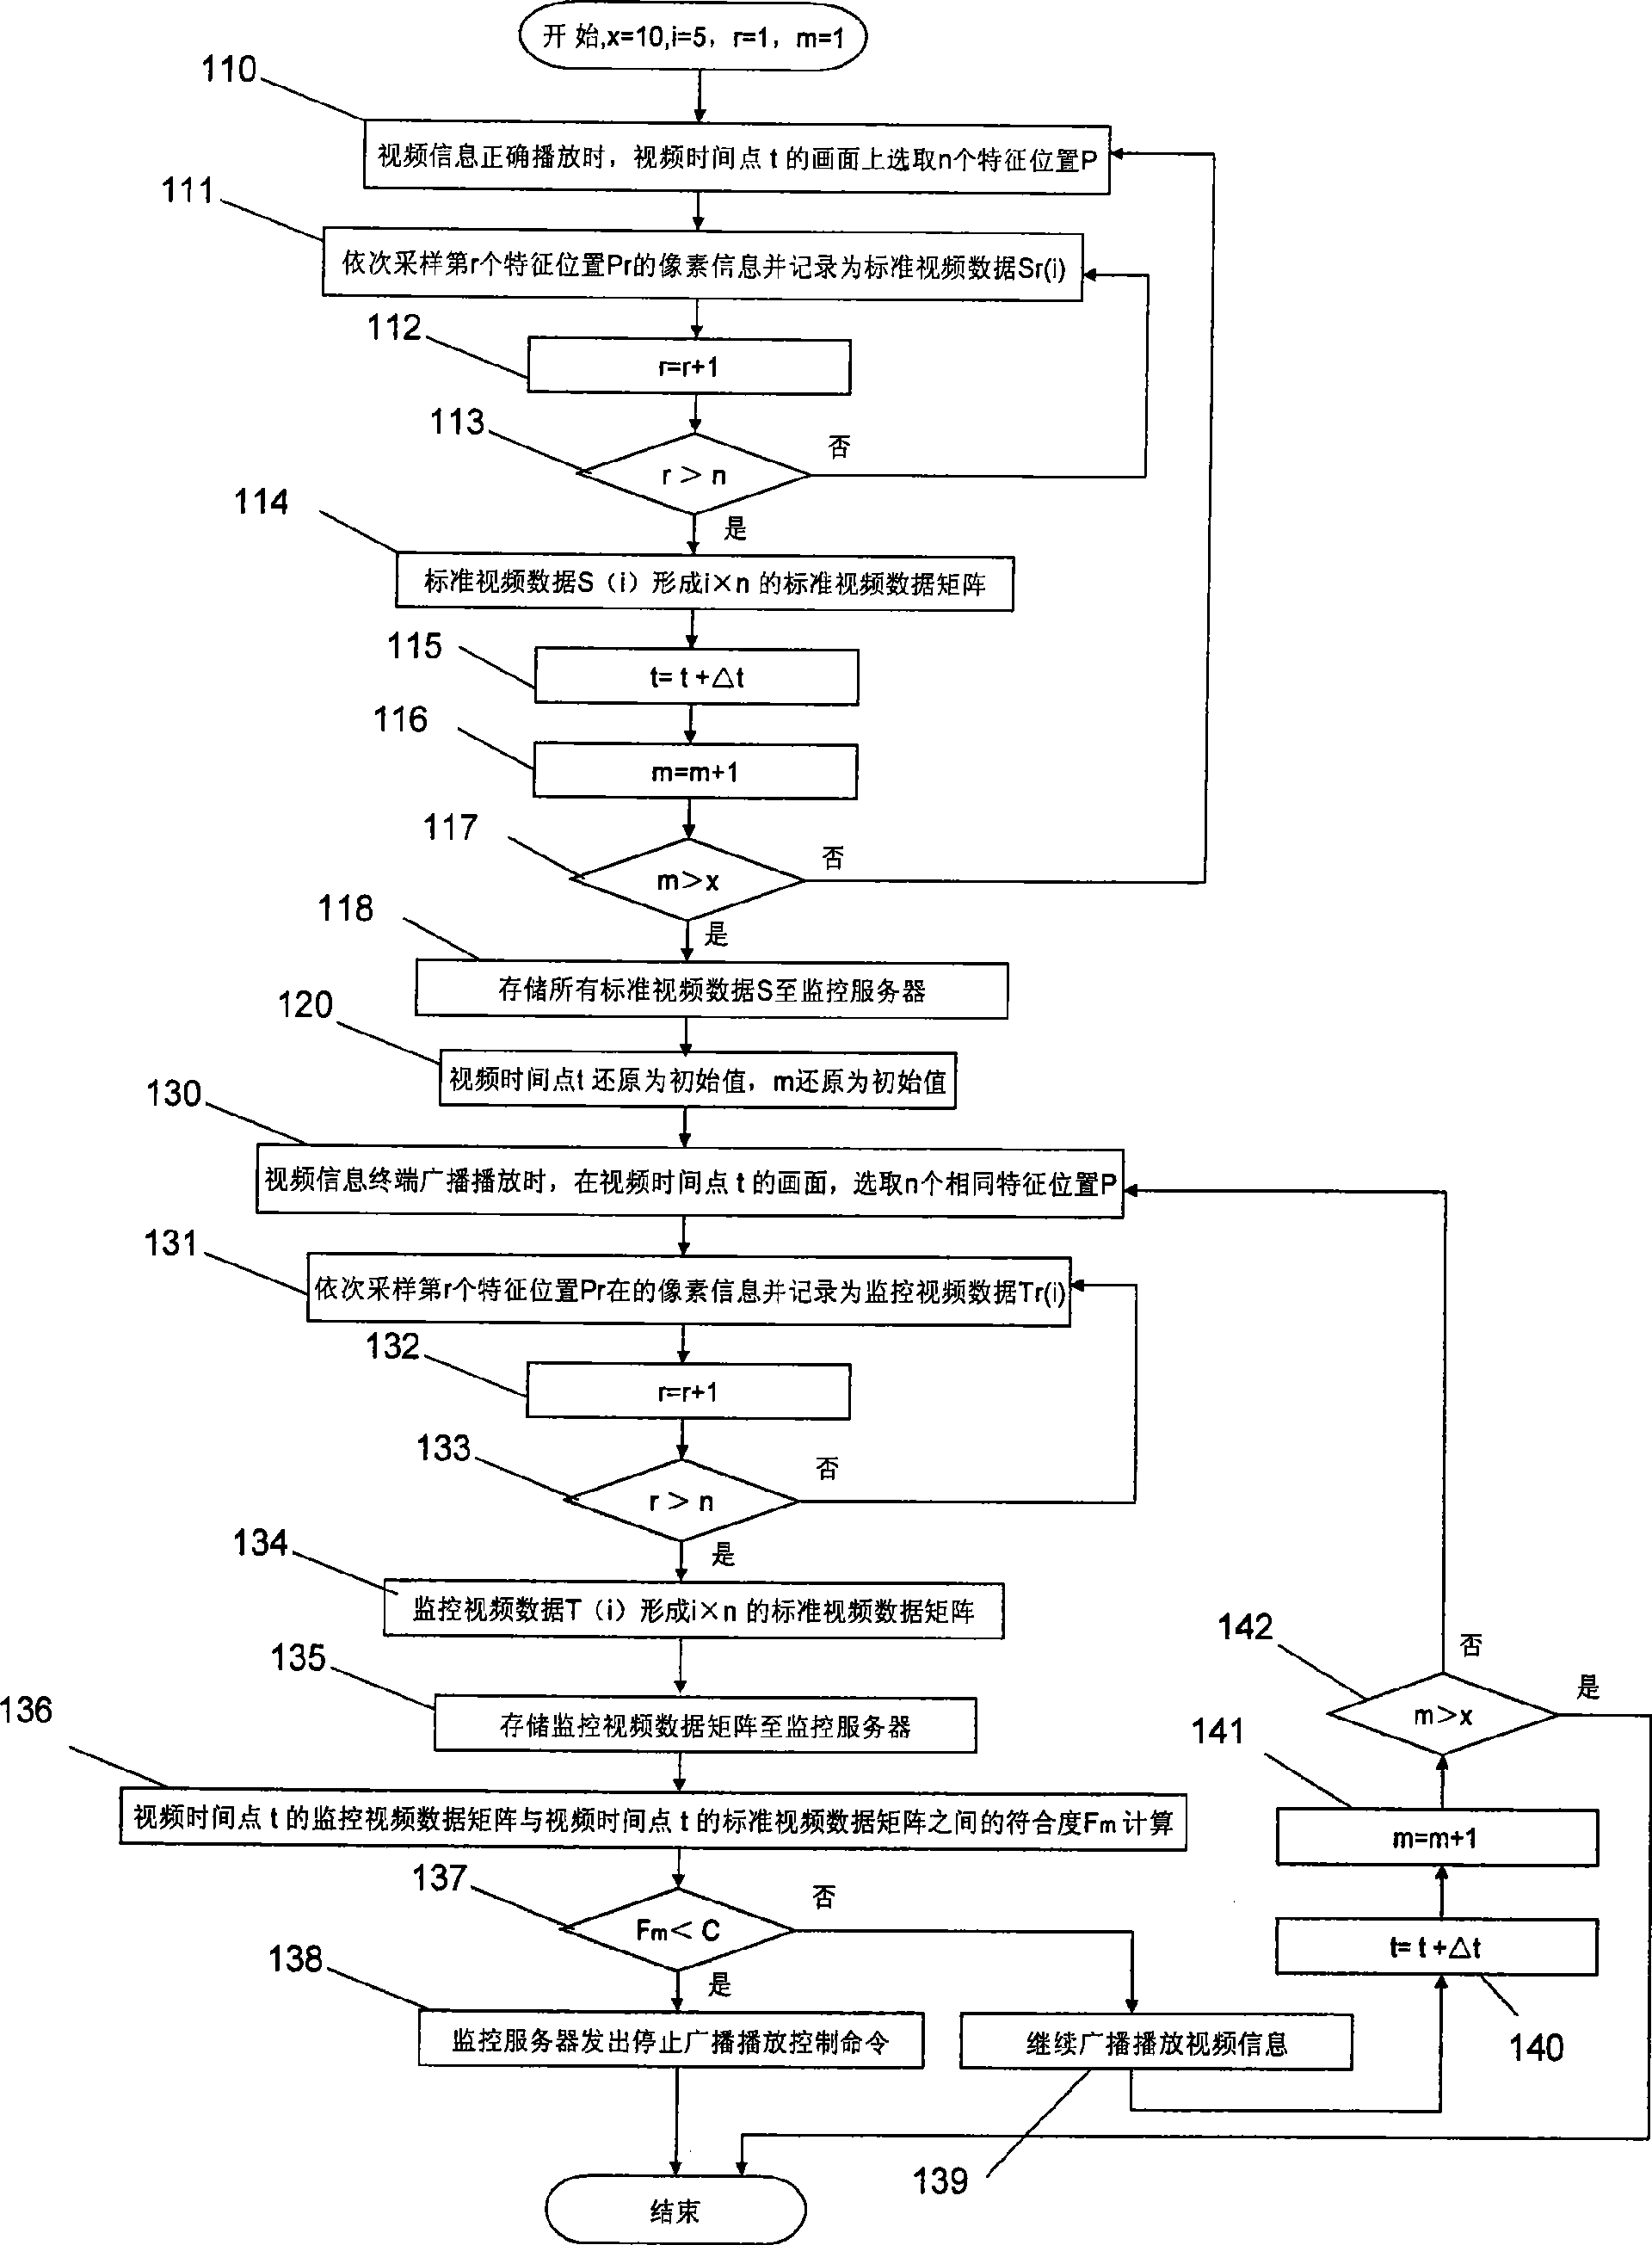 Monitoring method for video information display content